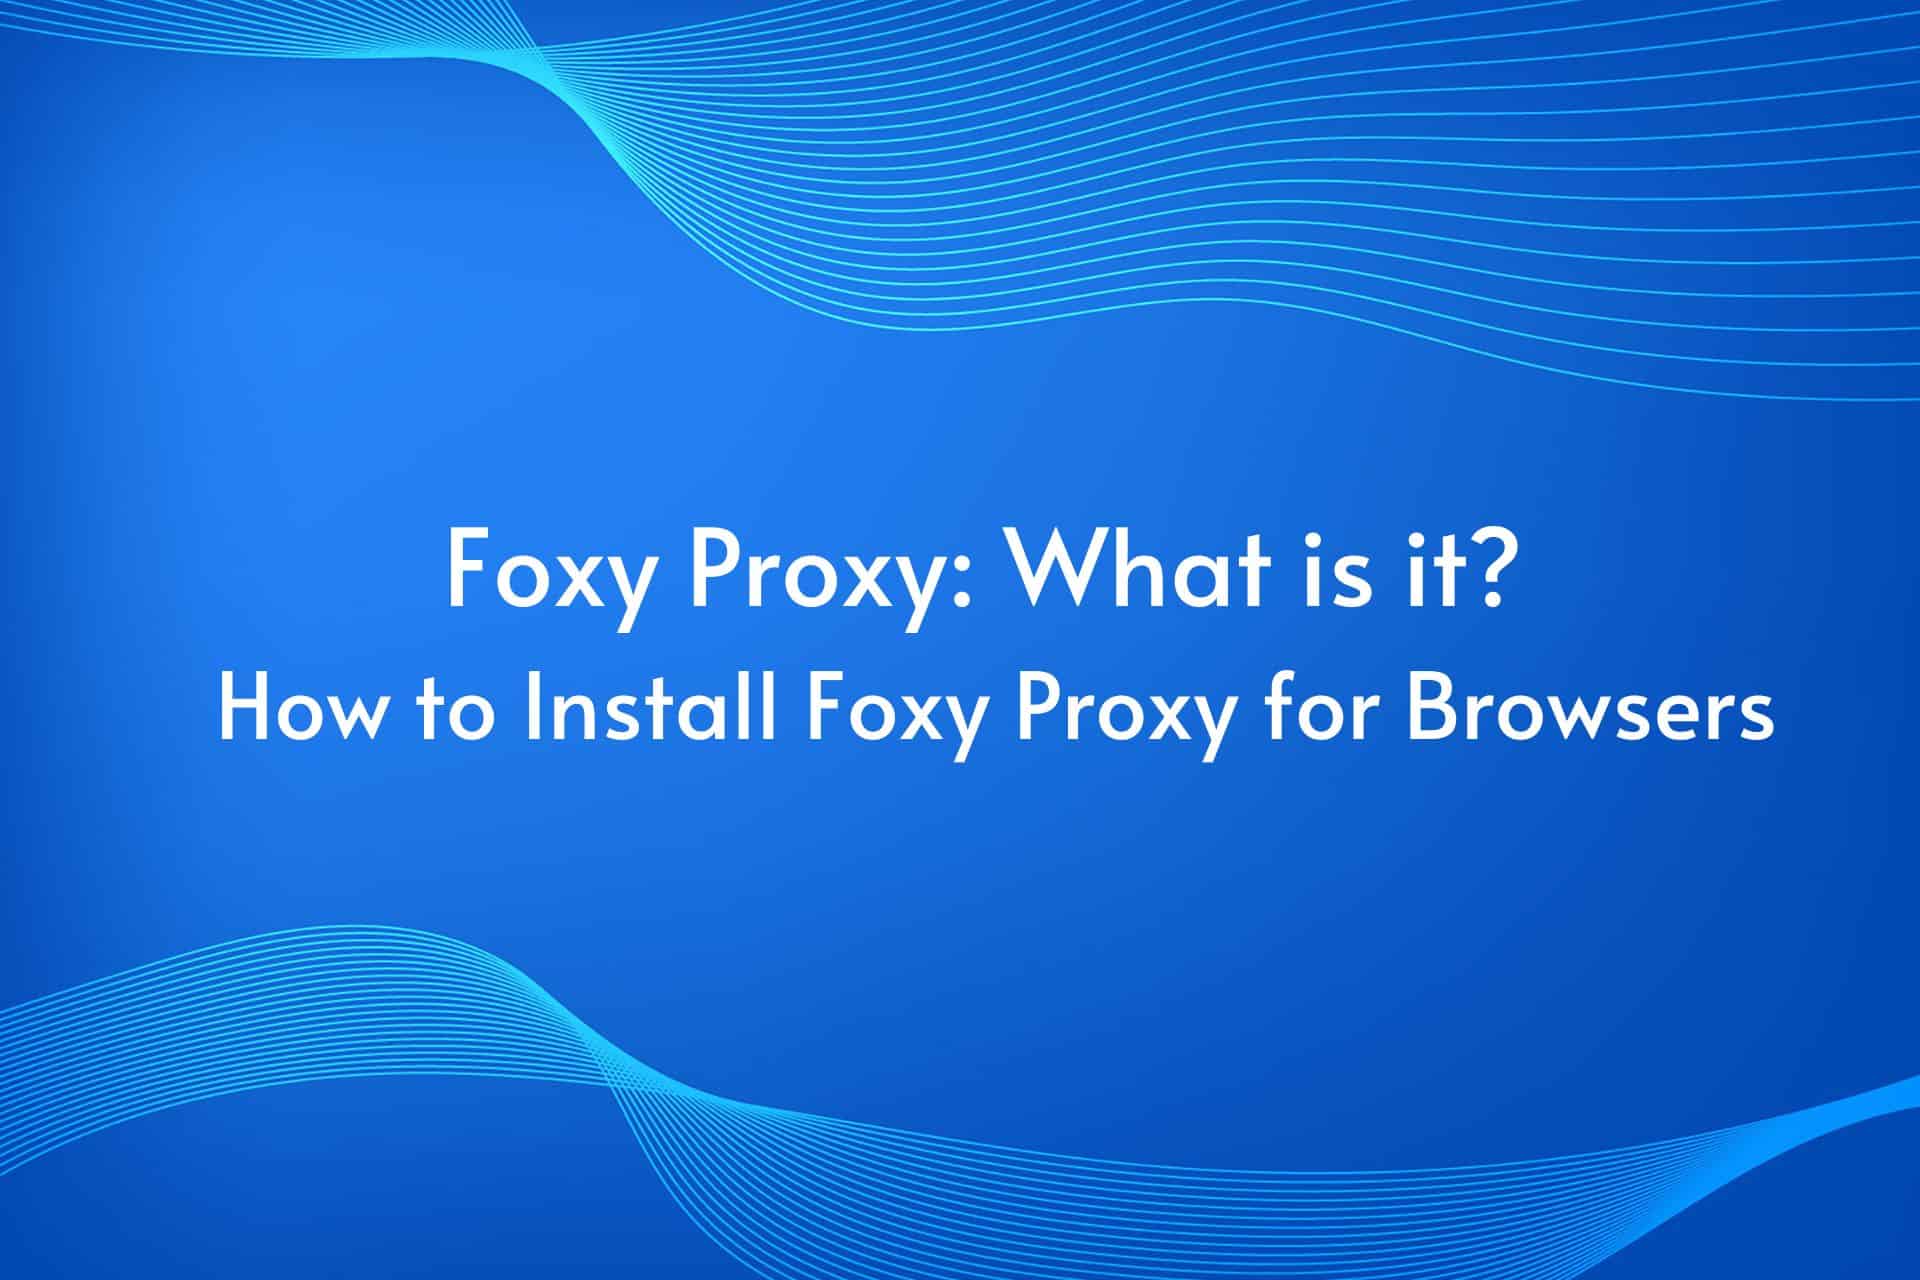 Foxy Proxy: What is it? How to Install Foxy Proxy for Browsers